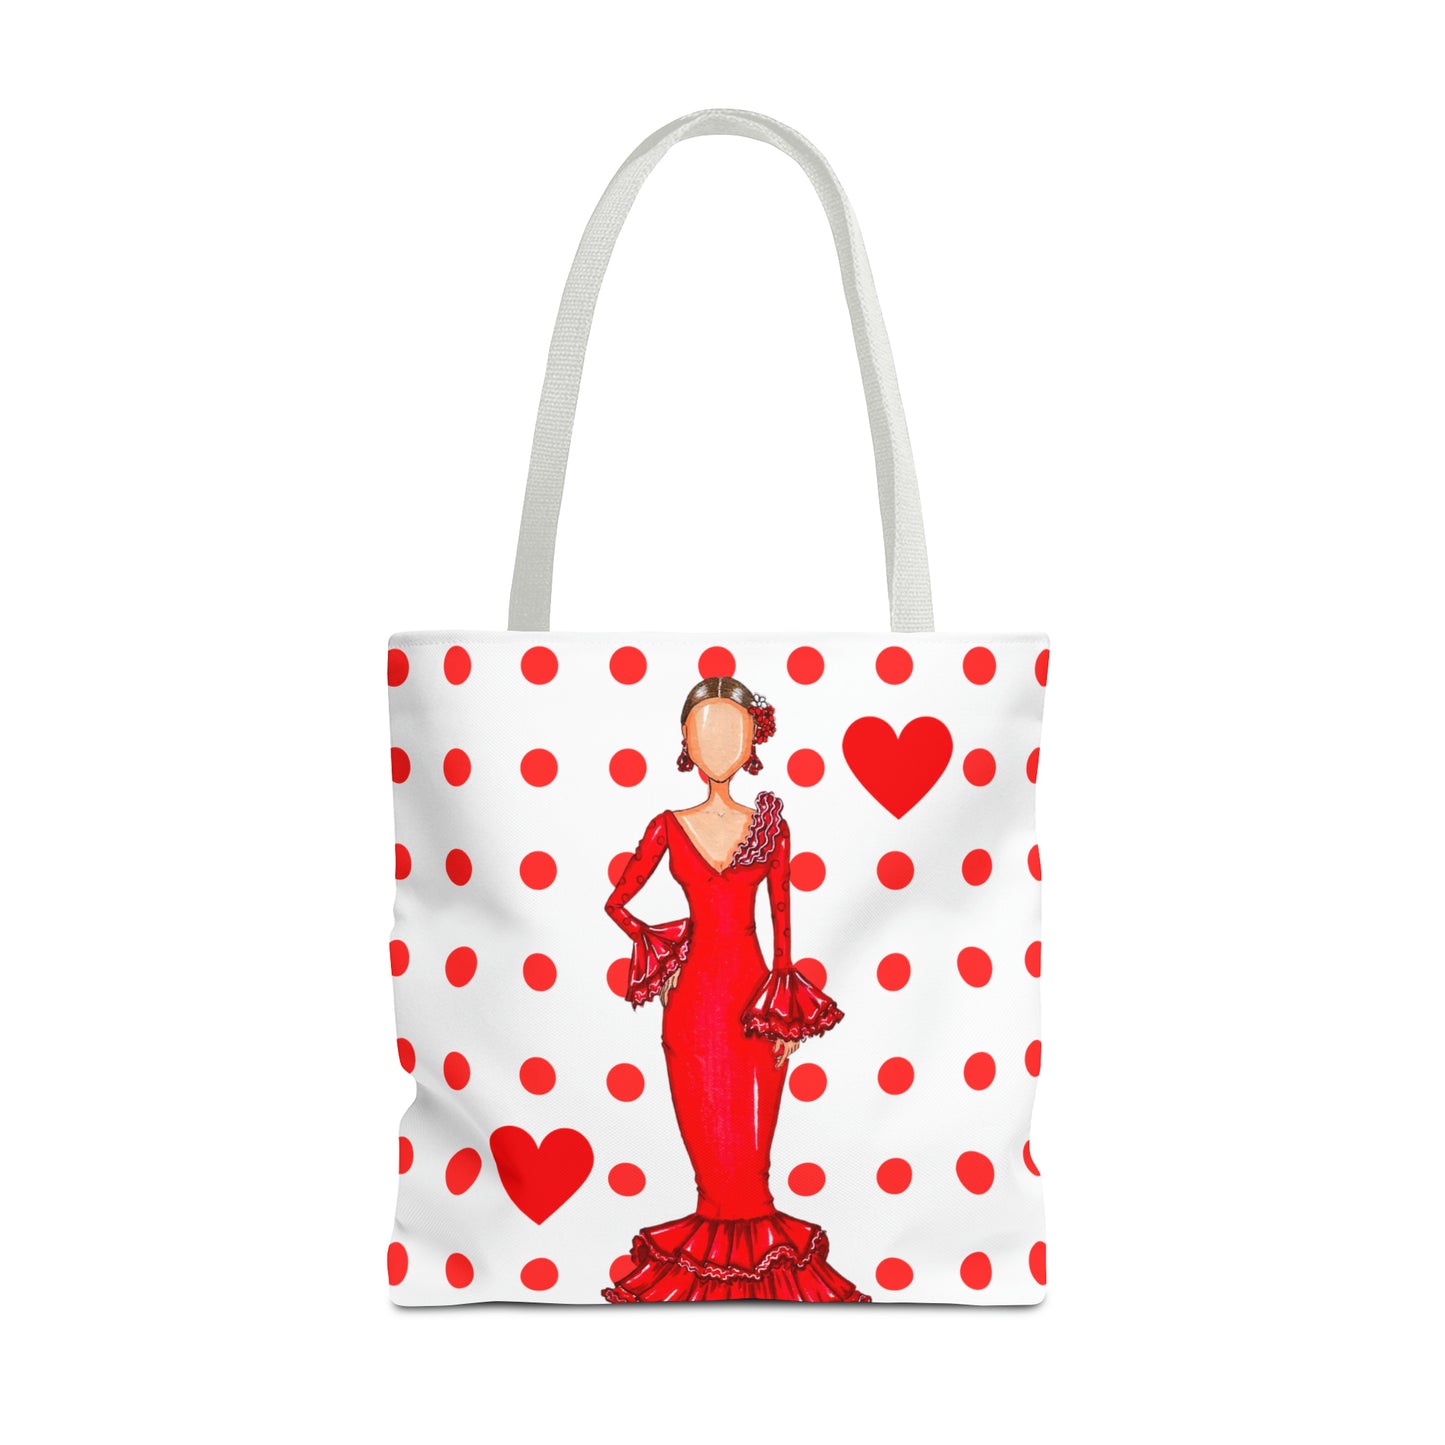 a red and white polka dot bag with a woman in a red dress